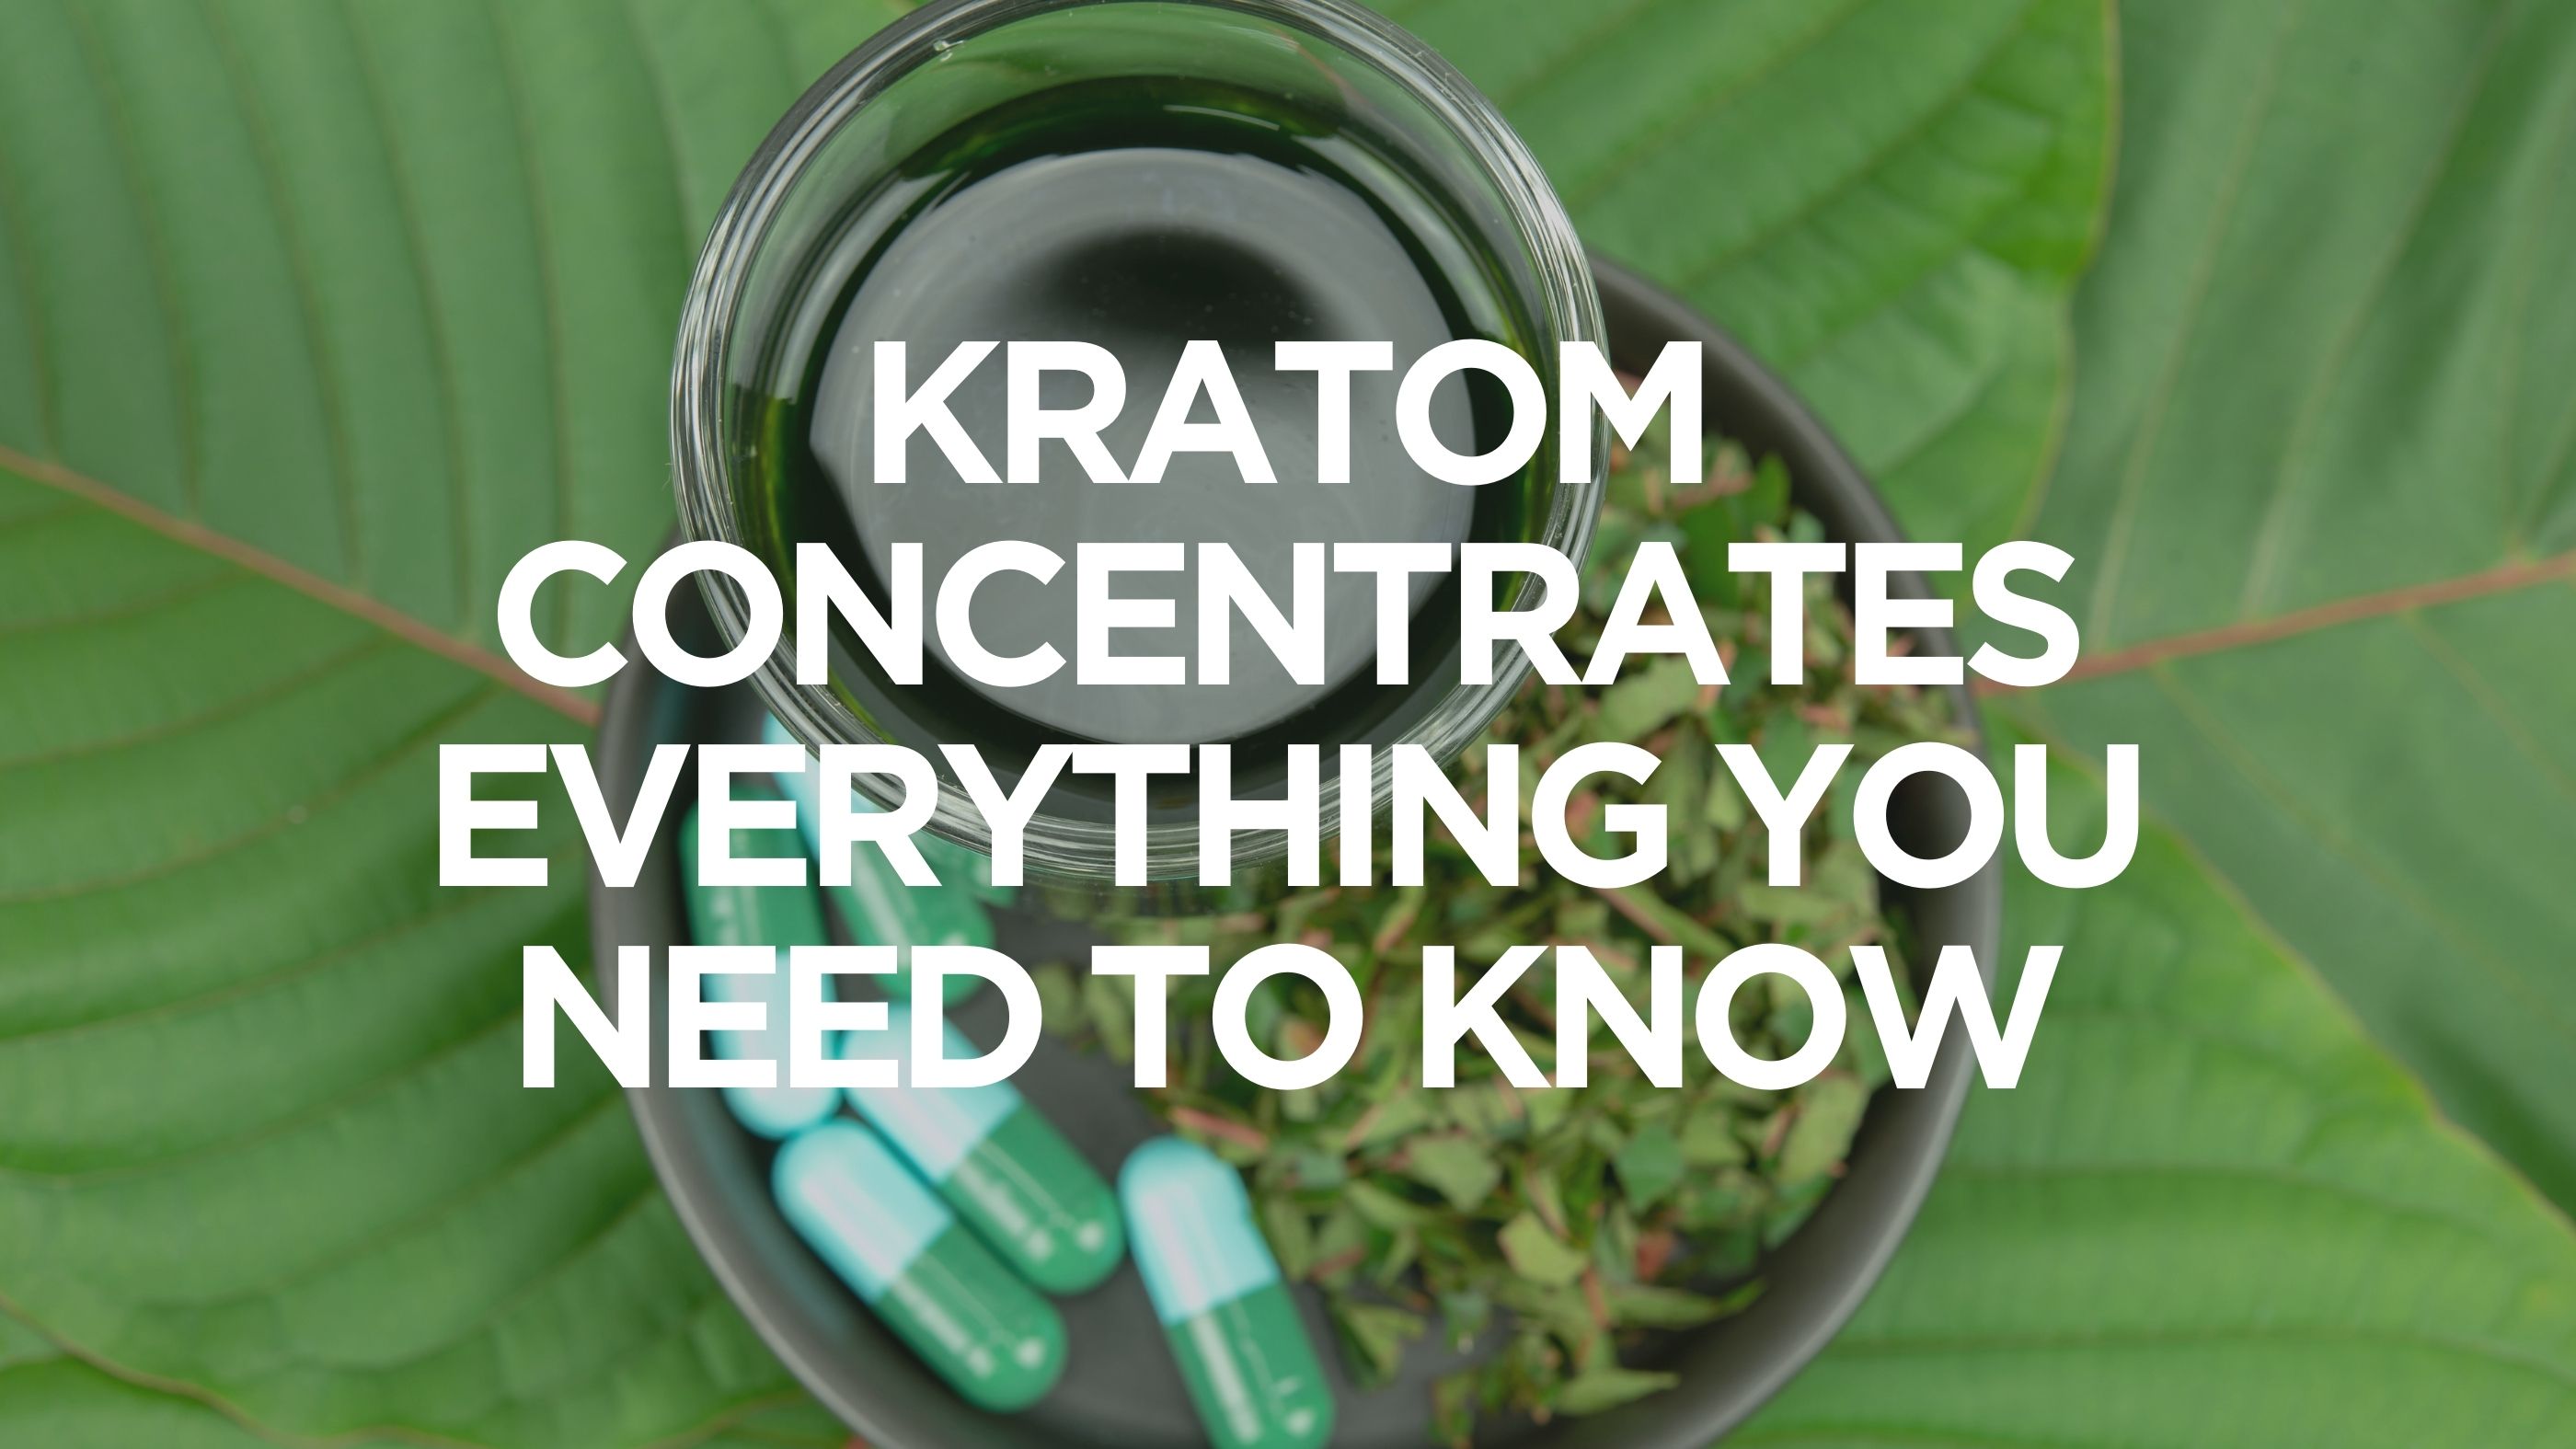 kratom-concentrates-everything-you-need-to-know